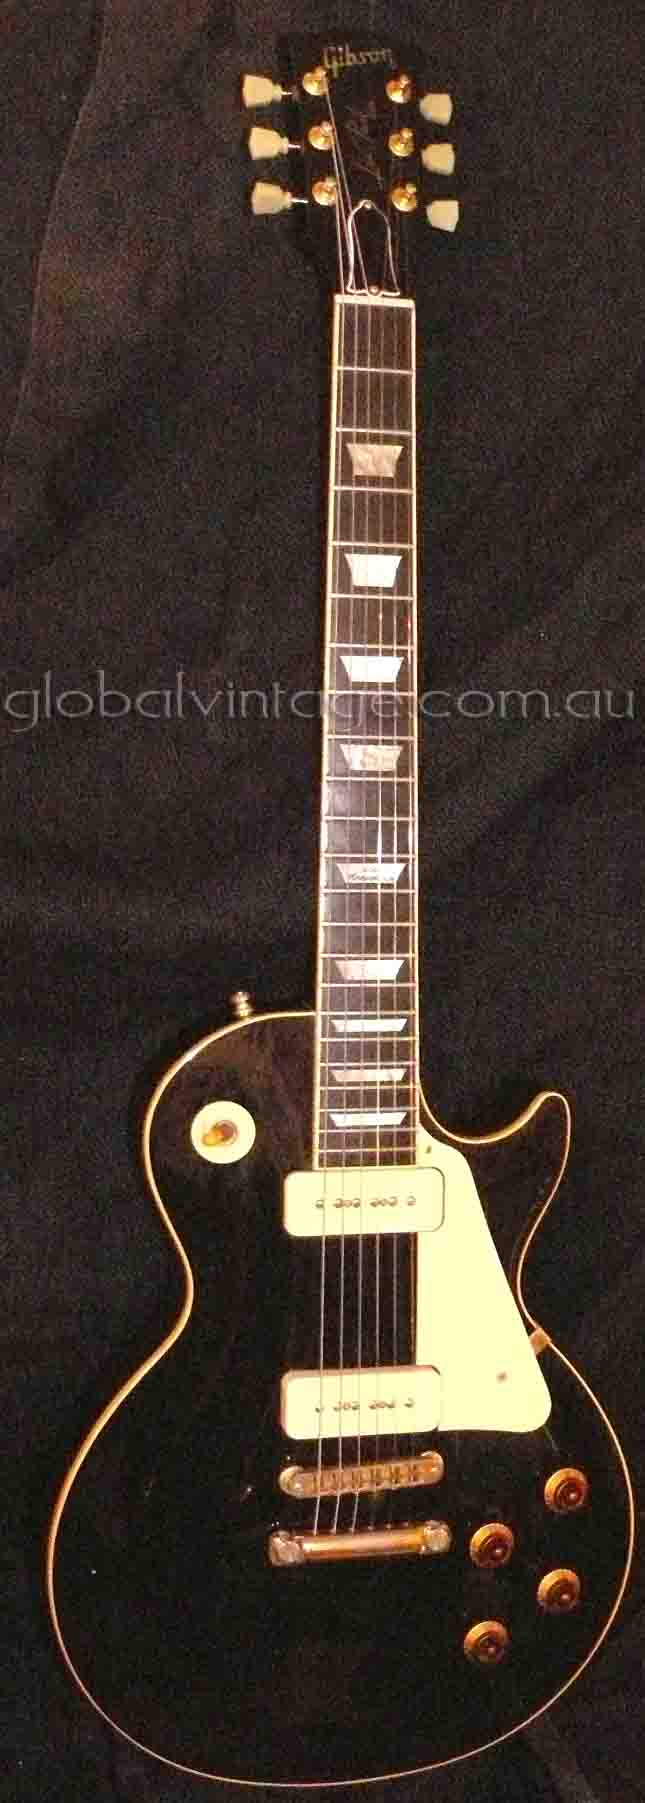 ~SOLD~Gibson USA `91 40th Anniversary Limited Edition Les Paul